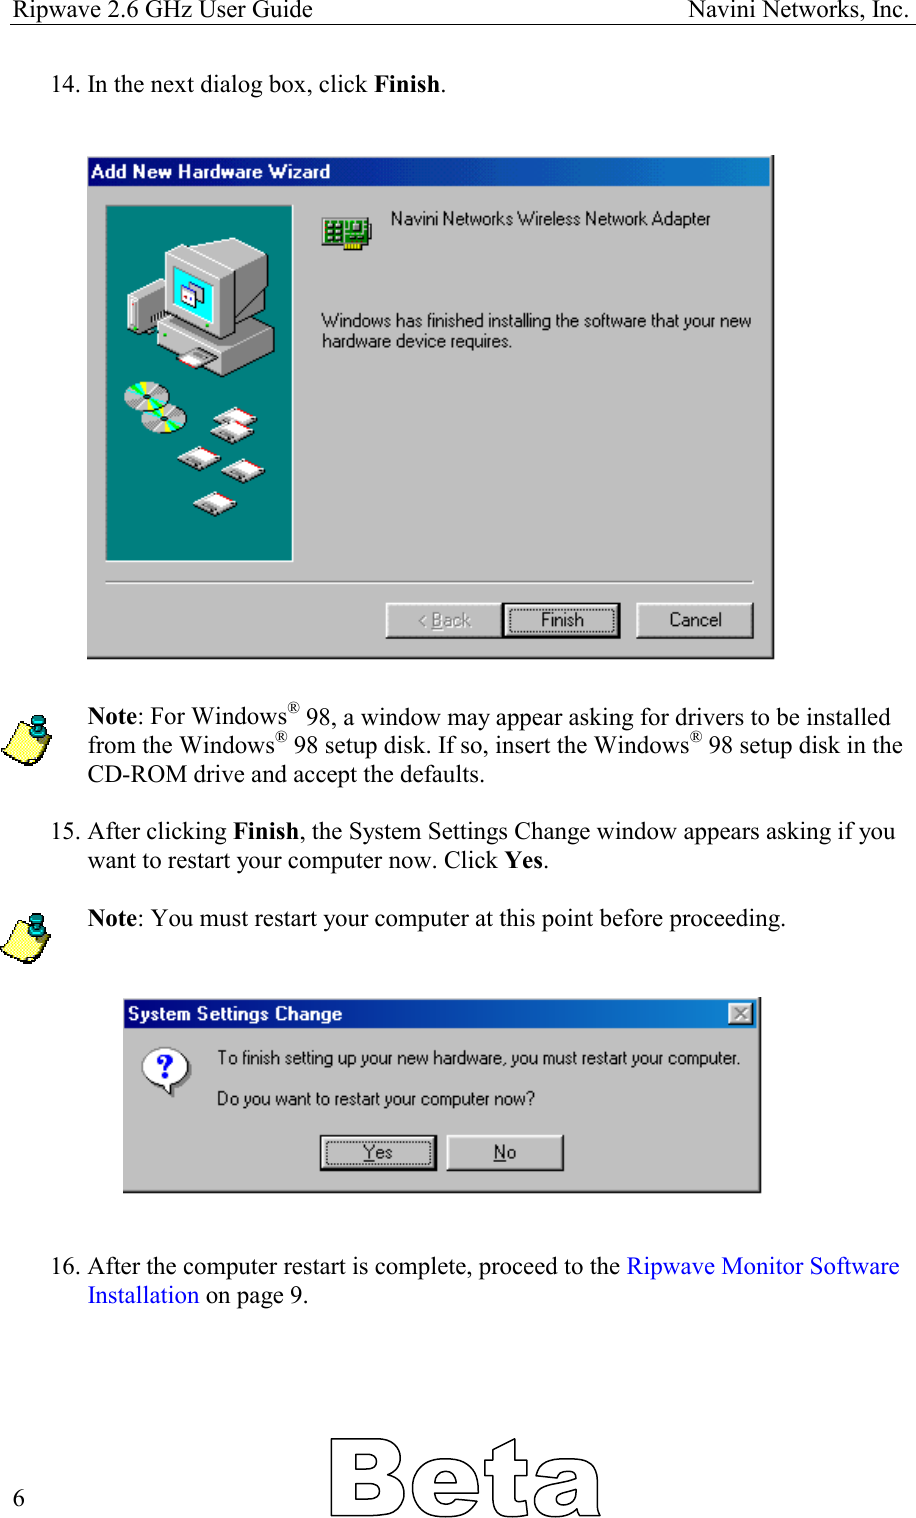 Ripwave 2.6 GHz User Guide                                                            Navini Networks, Inc. 14. In the next dialog box, click Finish.                      Note: For Windows® 98, a window may appear asking for drivers to be installed from the Windows® 98 setup disk. If so, insert the Windows® 98 setup disk in the CD-ROM drive and accept the defaults.  15. After clicking Finish, the System Settings Change window appears asking if you want to restart your computer now. Click Yes.  Note: You must restart your computer at this point before proceeding.      16. After the computer restart is complete, proceed to the Ripwave Monitor Software Installation on page 9.        6